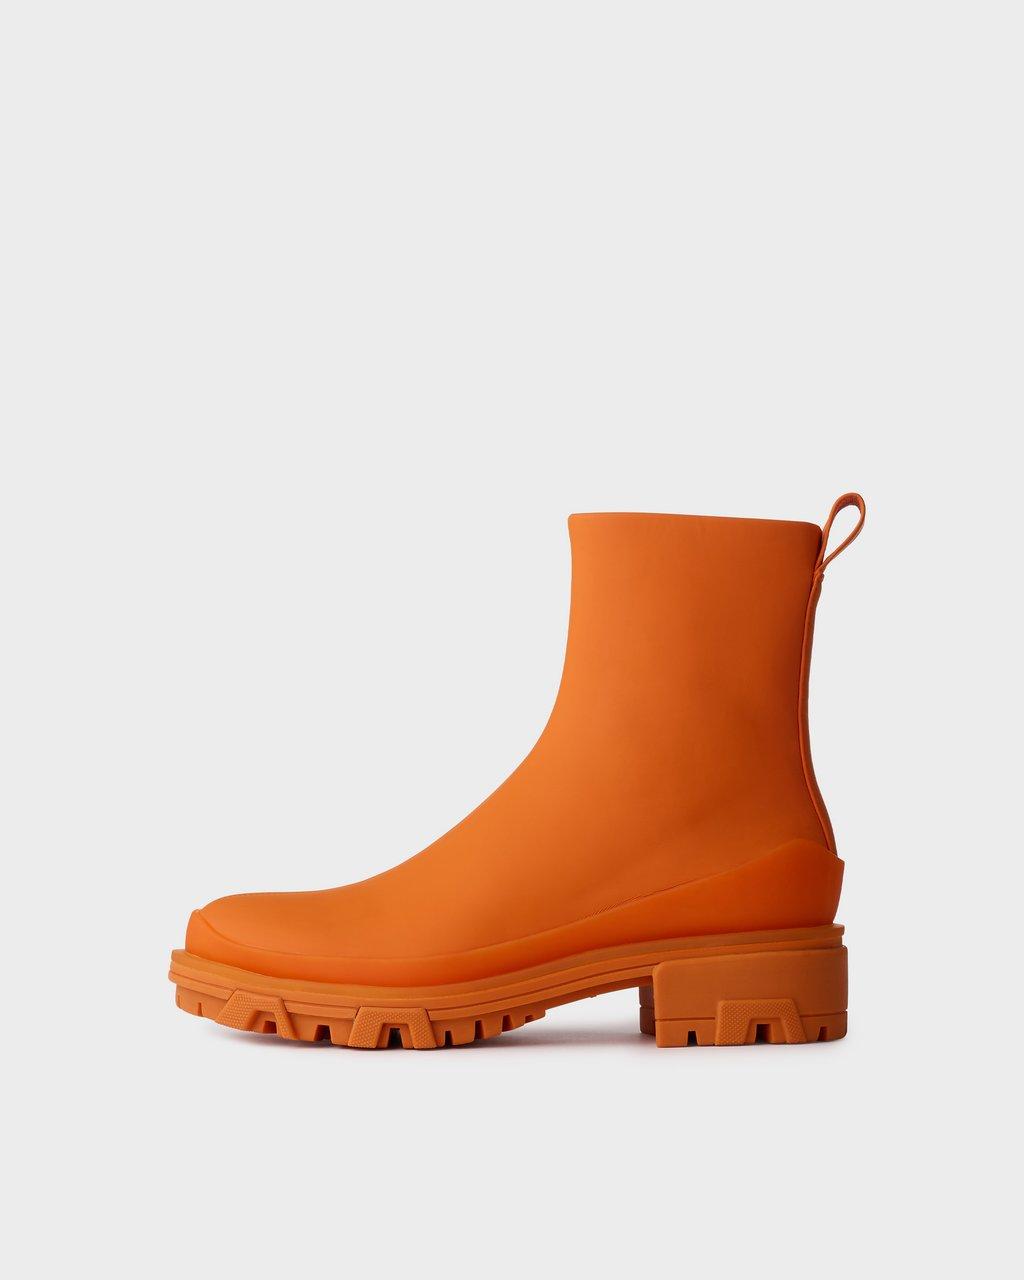 Can You Stand The Rain? With These 15 Luxury Rubber Boots You Certainly ...